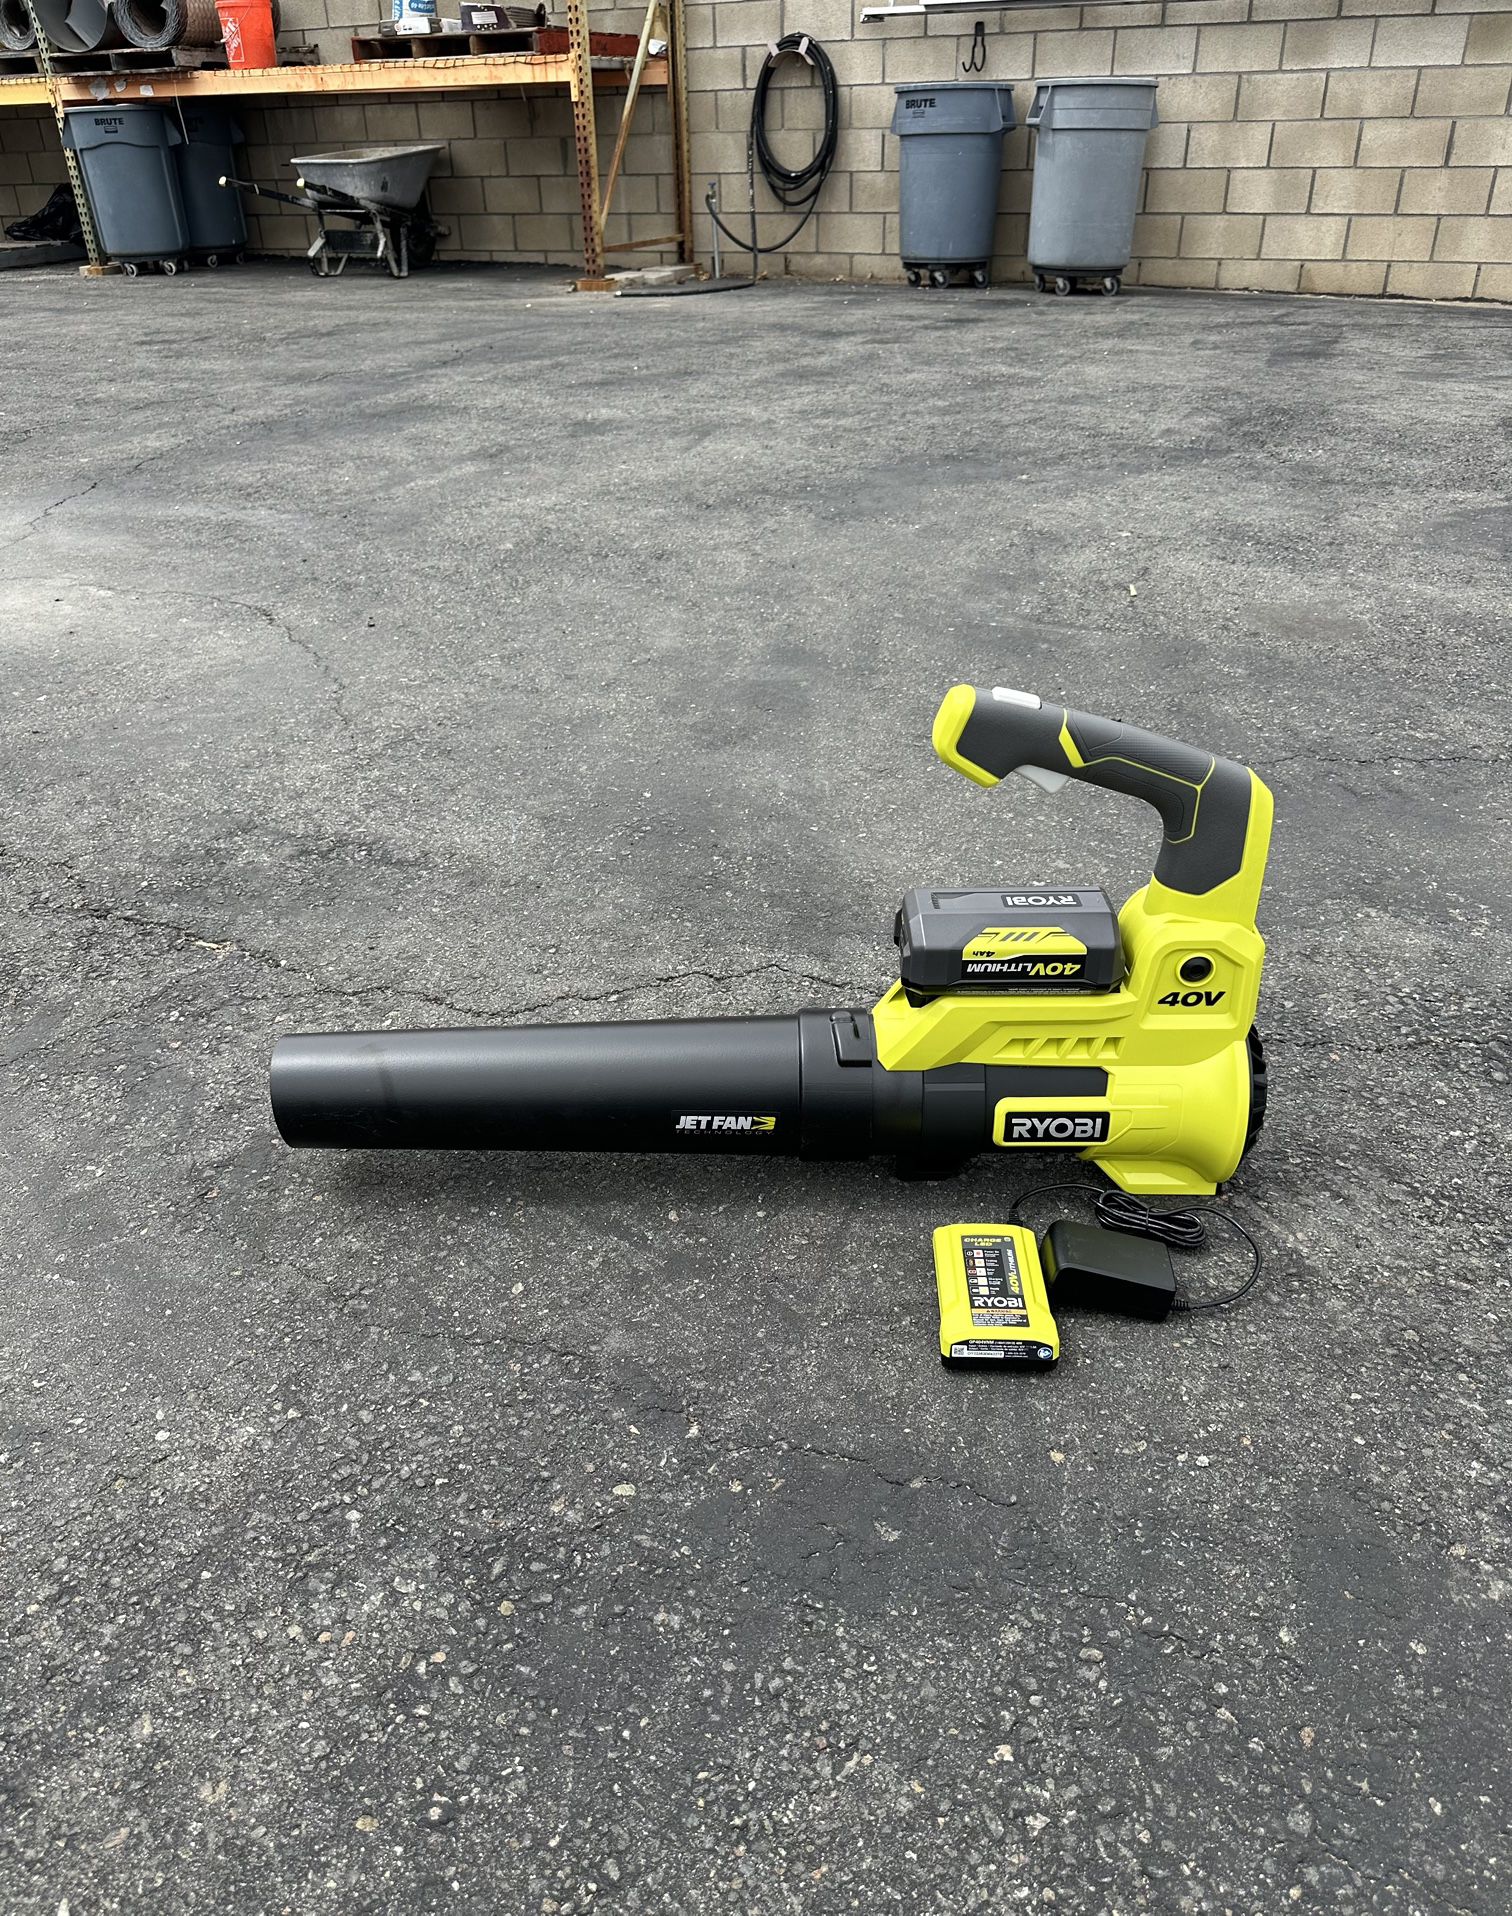 RYOBI40V 110 MPH 525 CFM Cordless Battery Variable-Speed Jet Fan Leaf Blower with 4.0 Ah Battery and Charger.